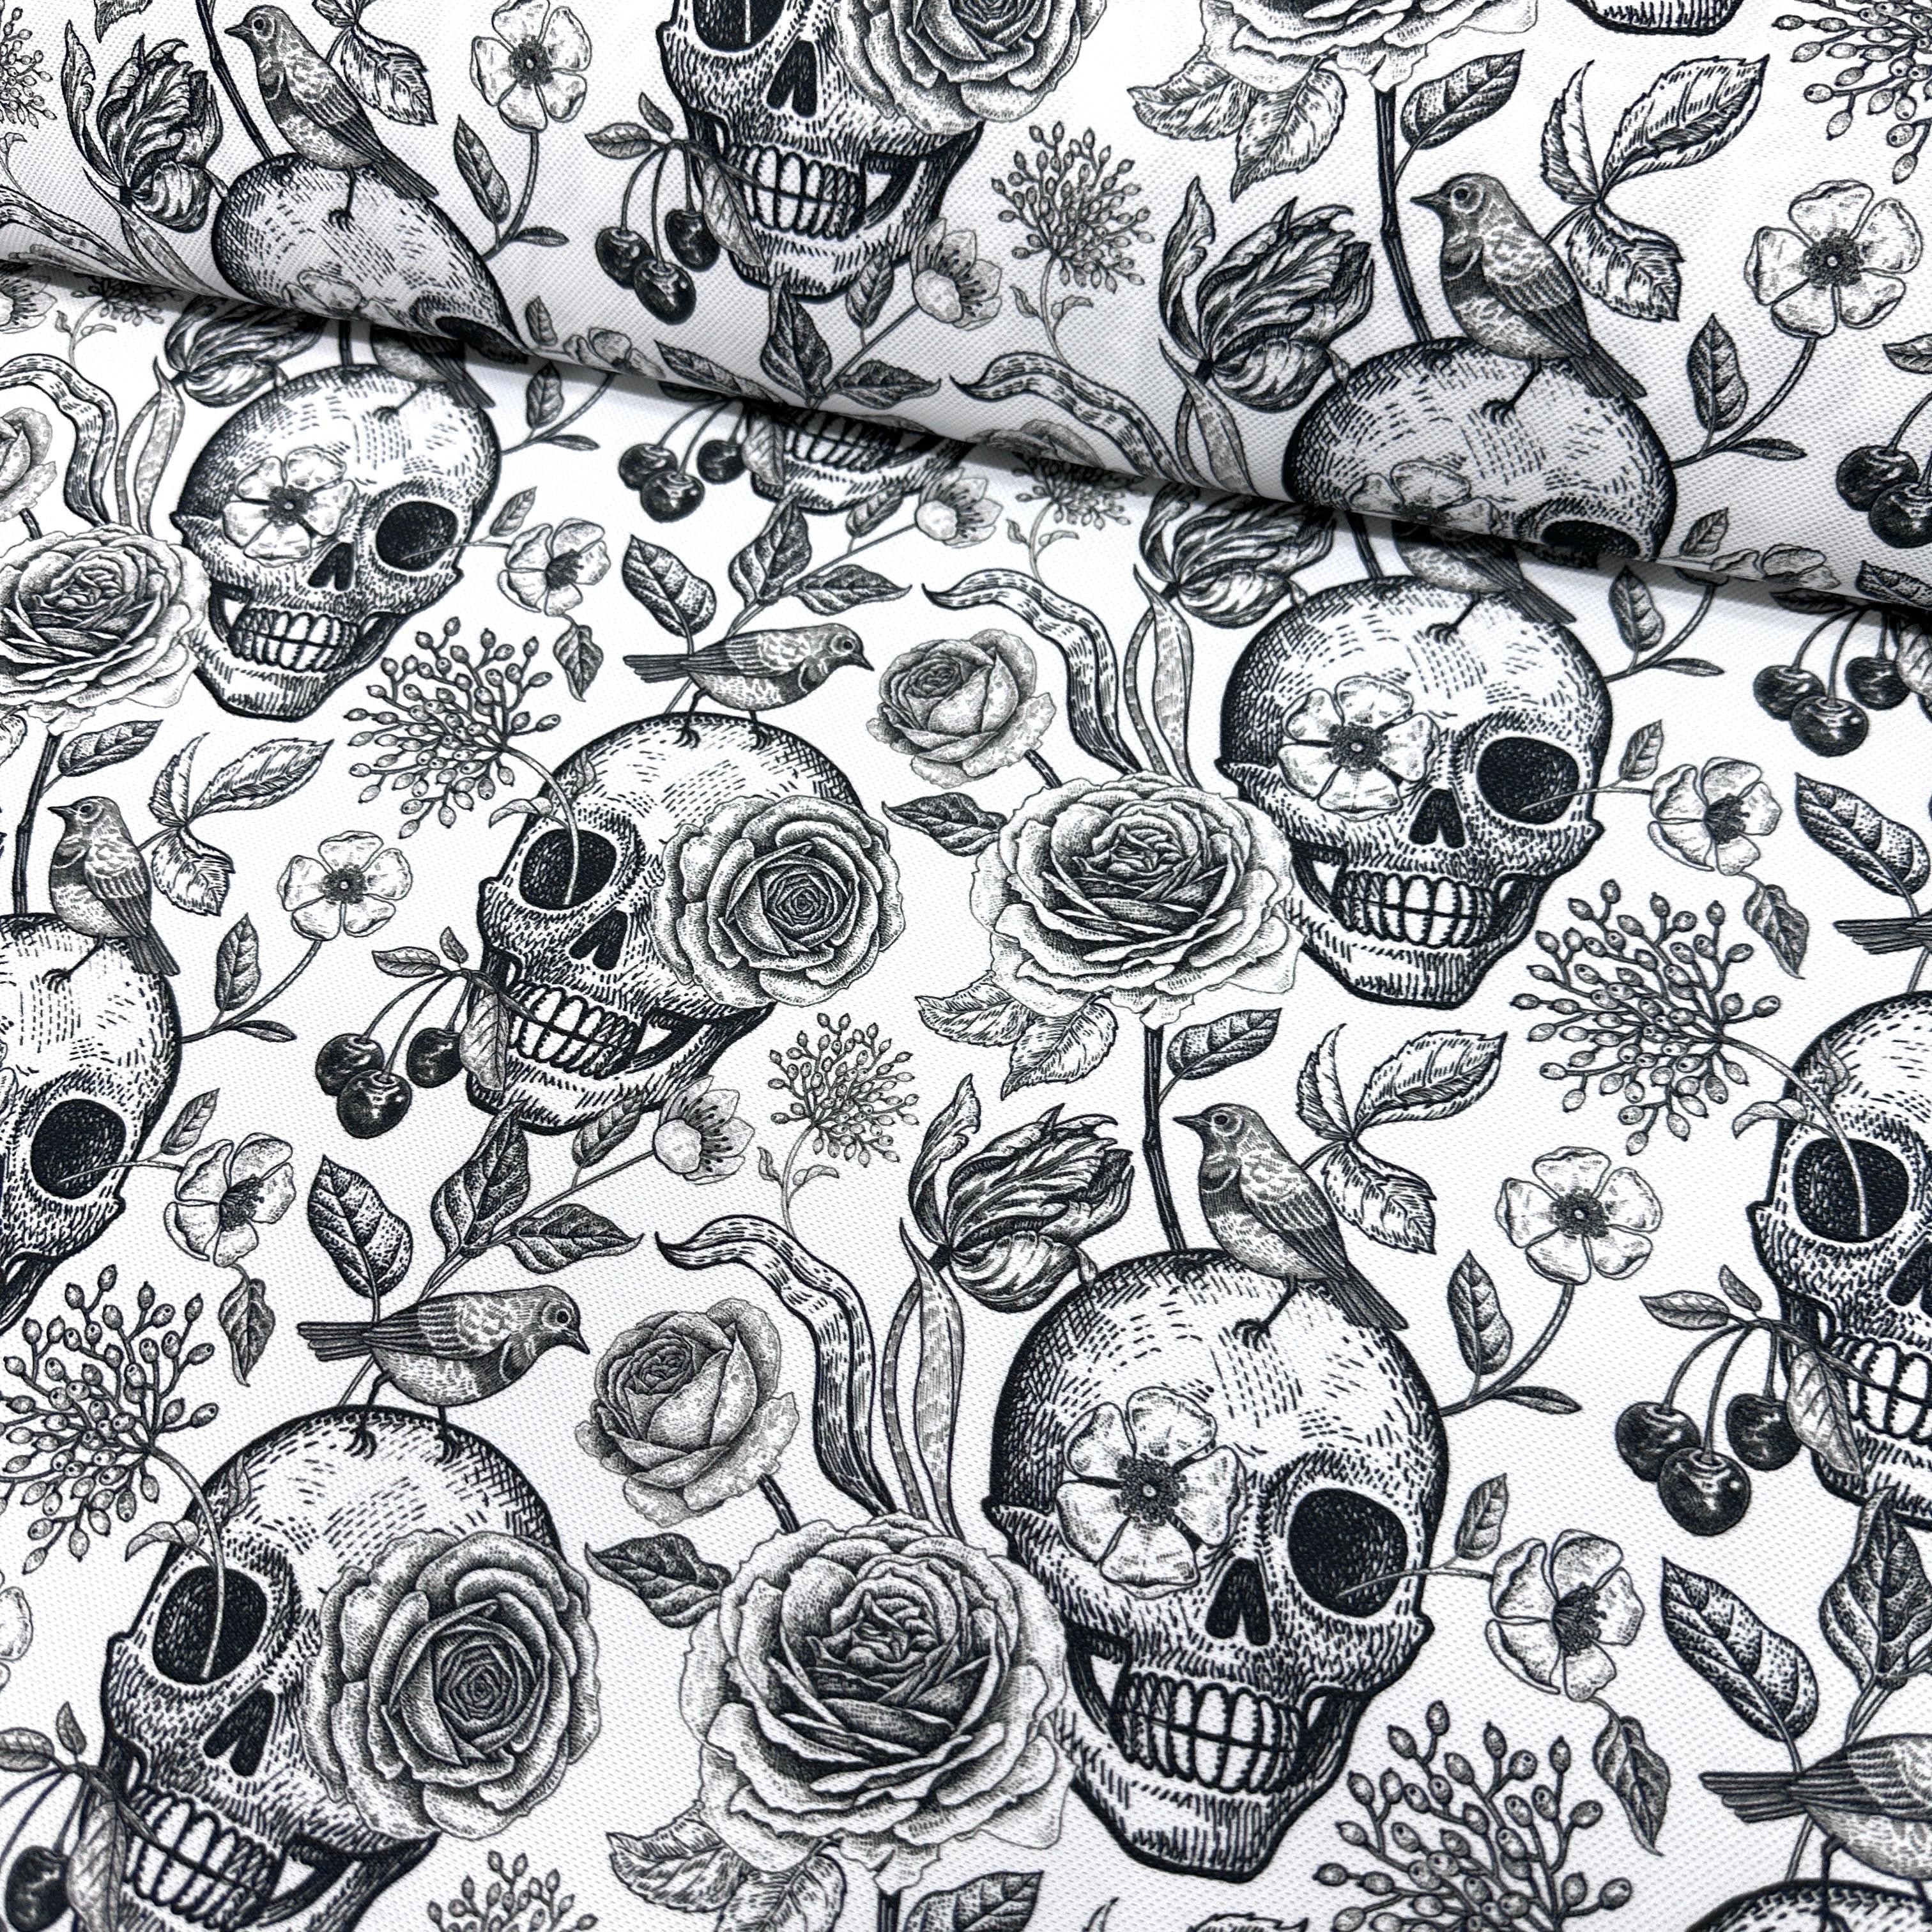 Life From Death Digital Printing Fabric